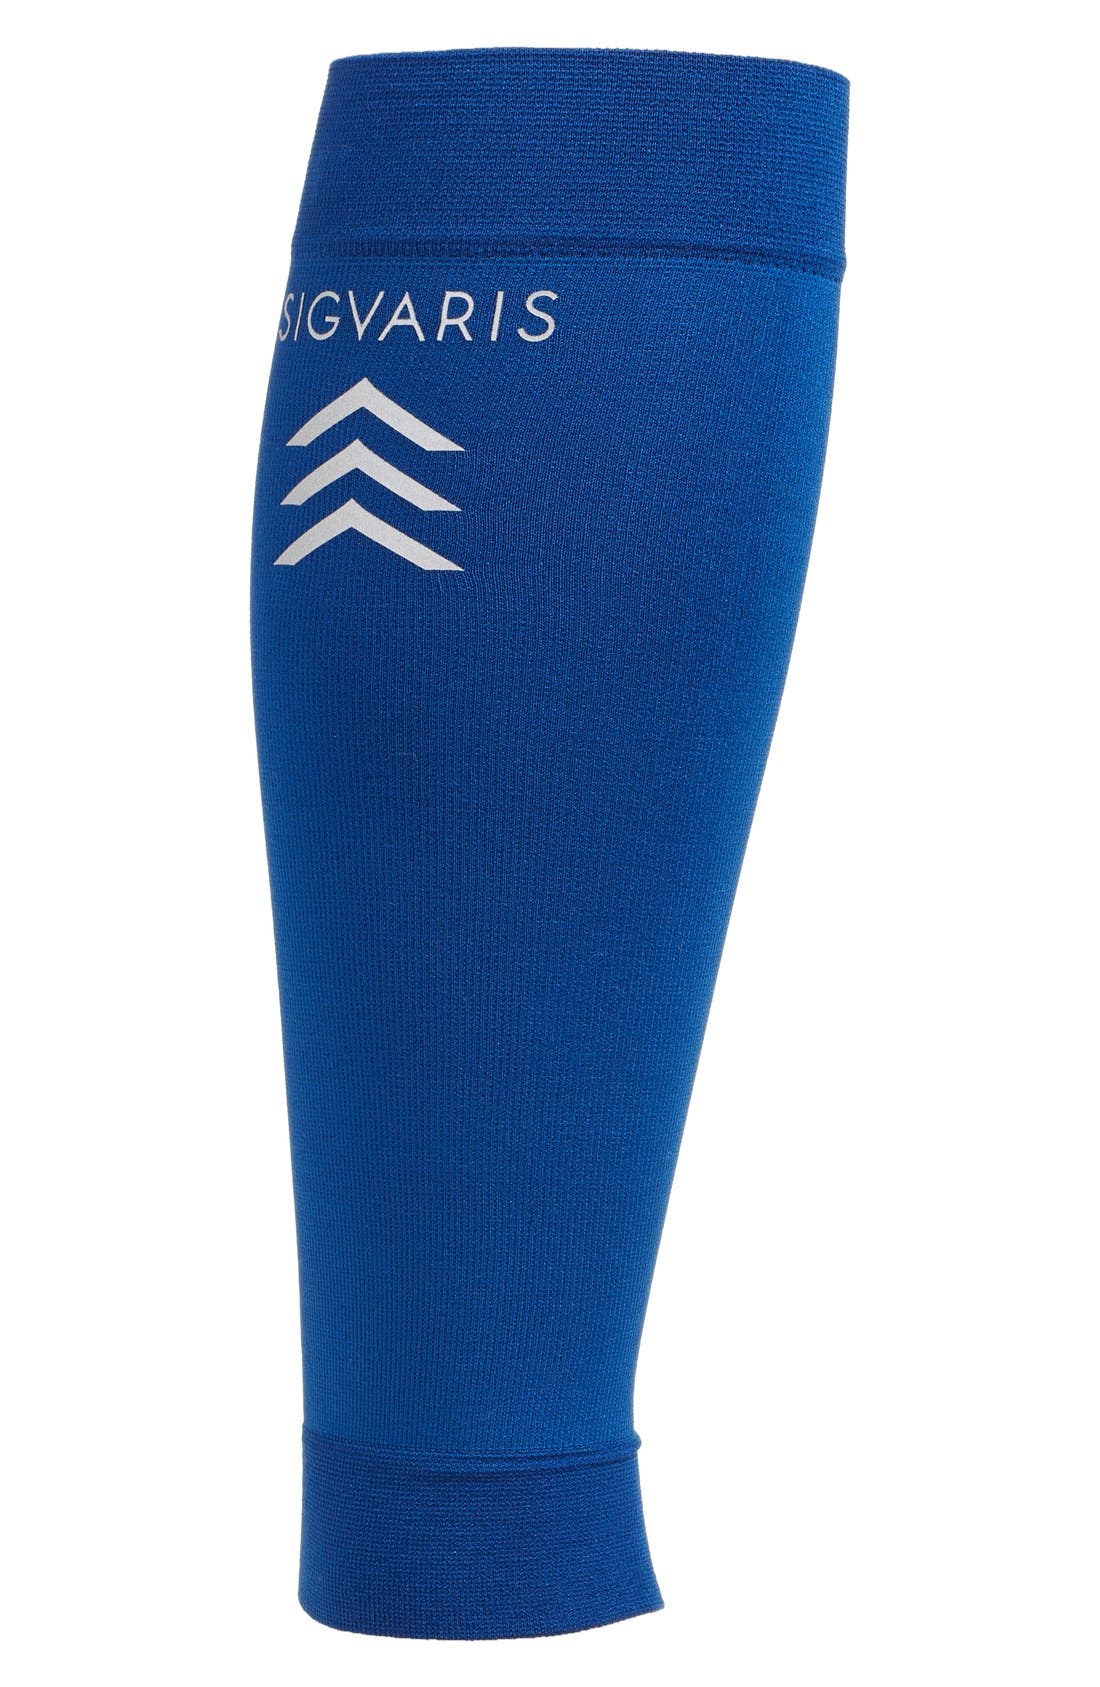 UPC 745129216948 product image for Men's Insignia By Sigvaris 'Sports' Graduated Compression Performance Calf Sleev | upcitemdb.com